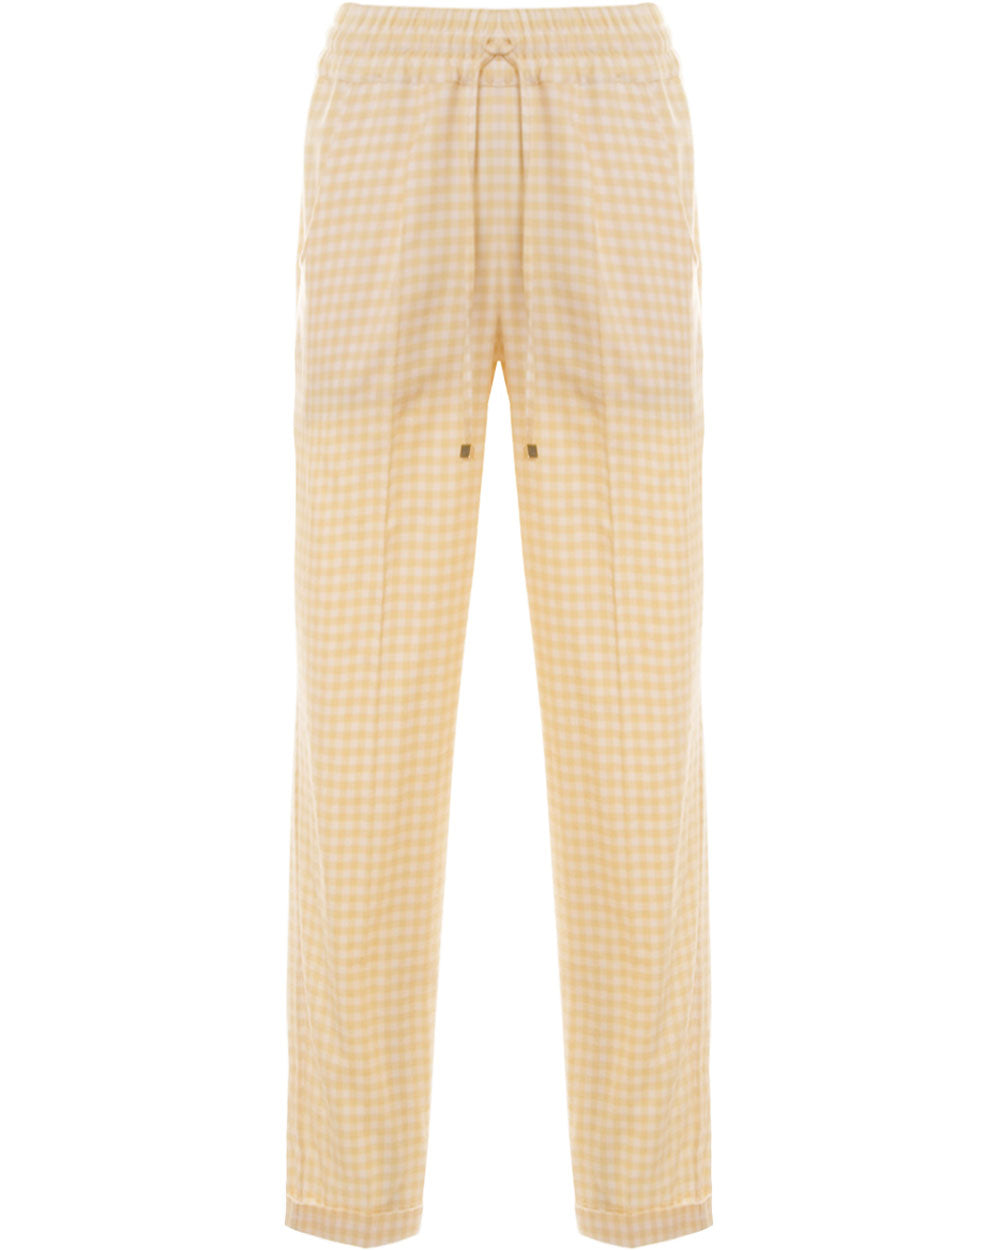 Pale Yellow Gingham Cuffed Trouser